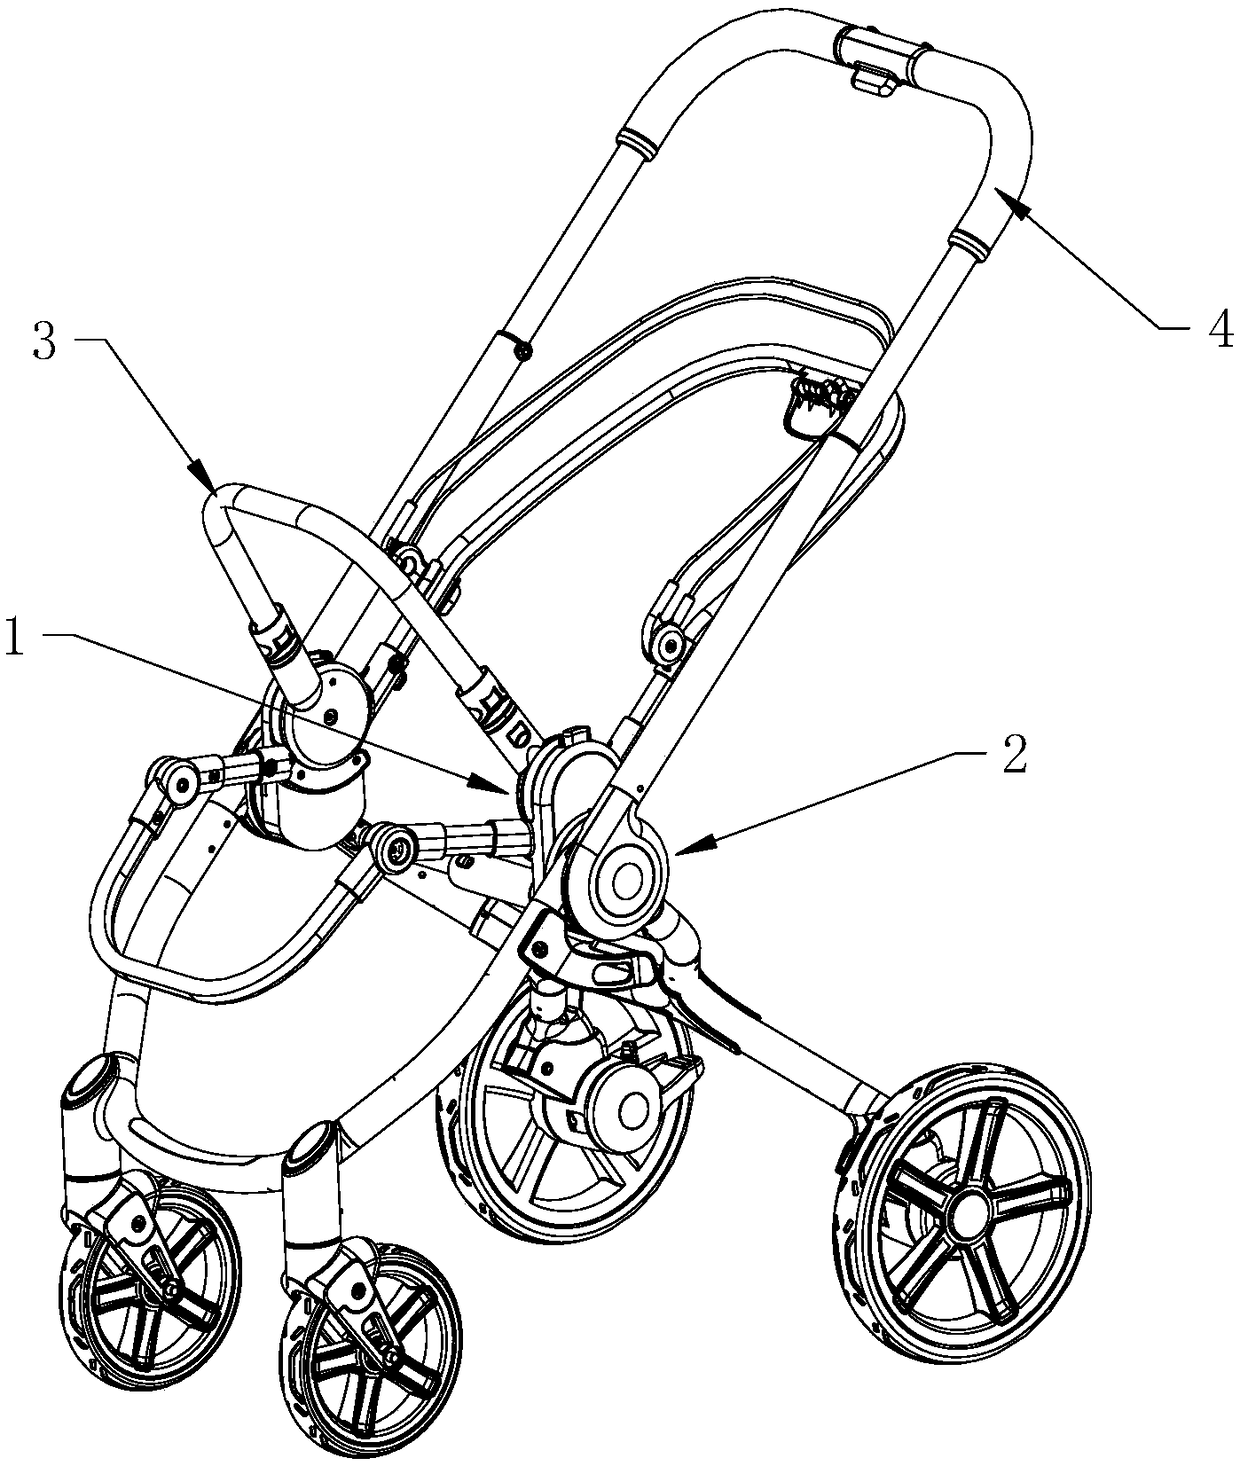 A locking connection structure and a baby carriage